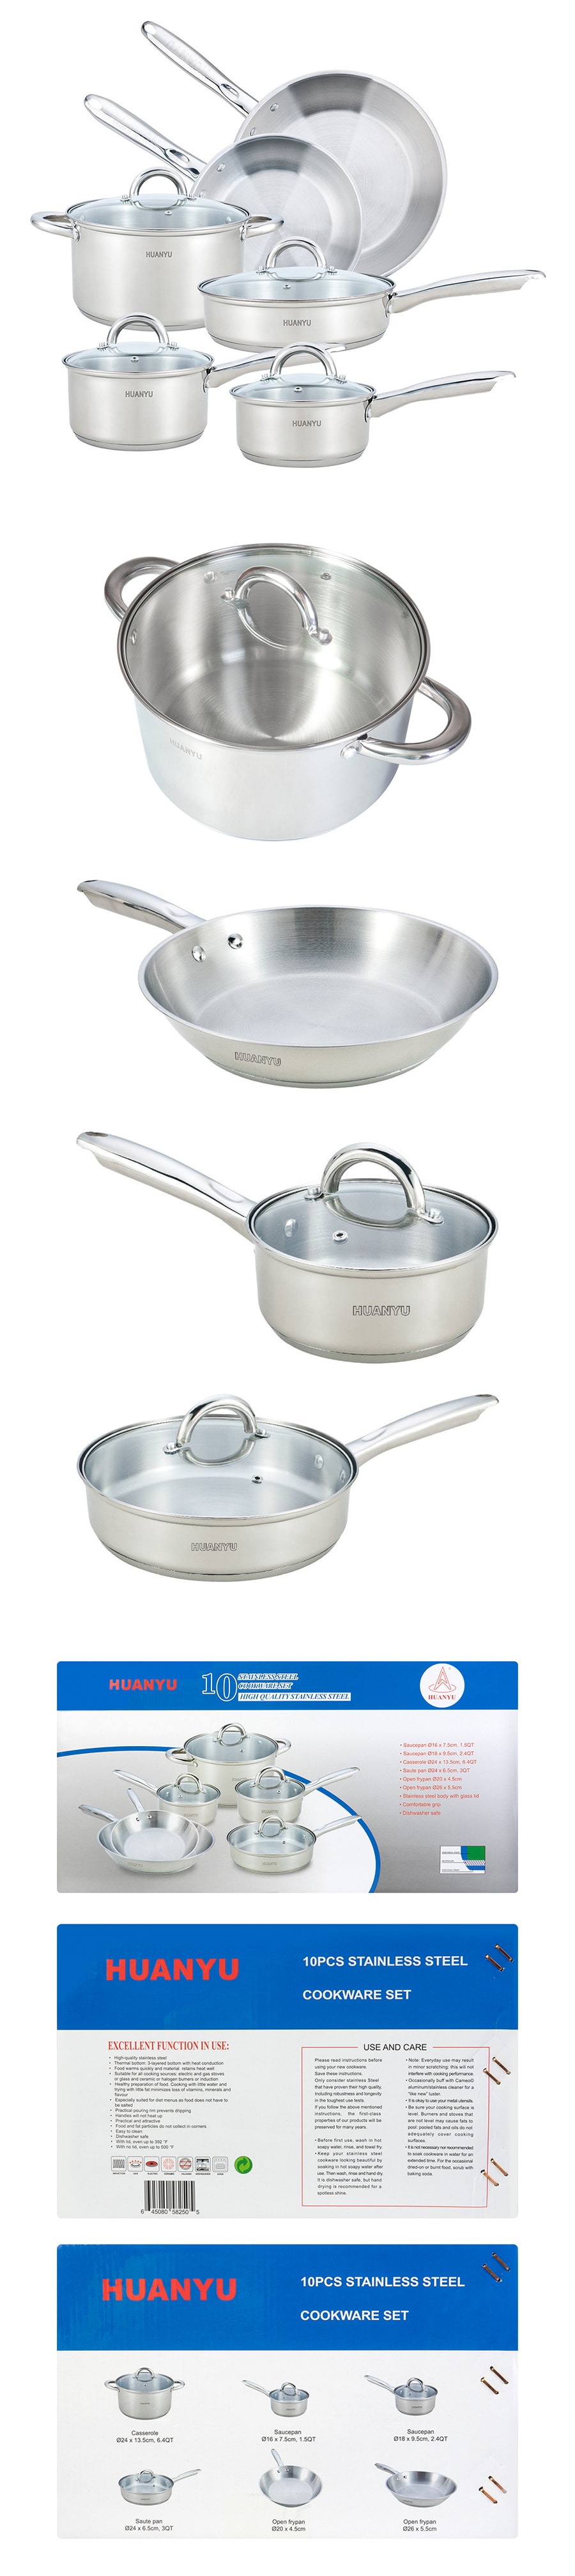 10 Piece Stainless Steel Cookware Set (pots and pans)